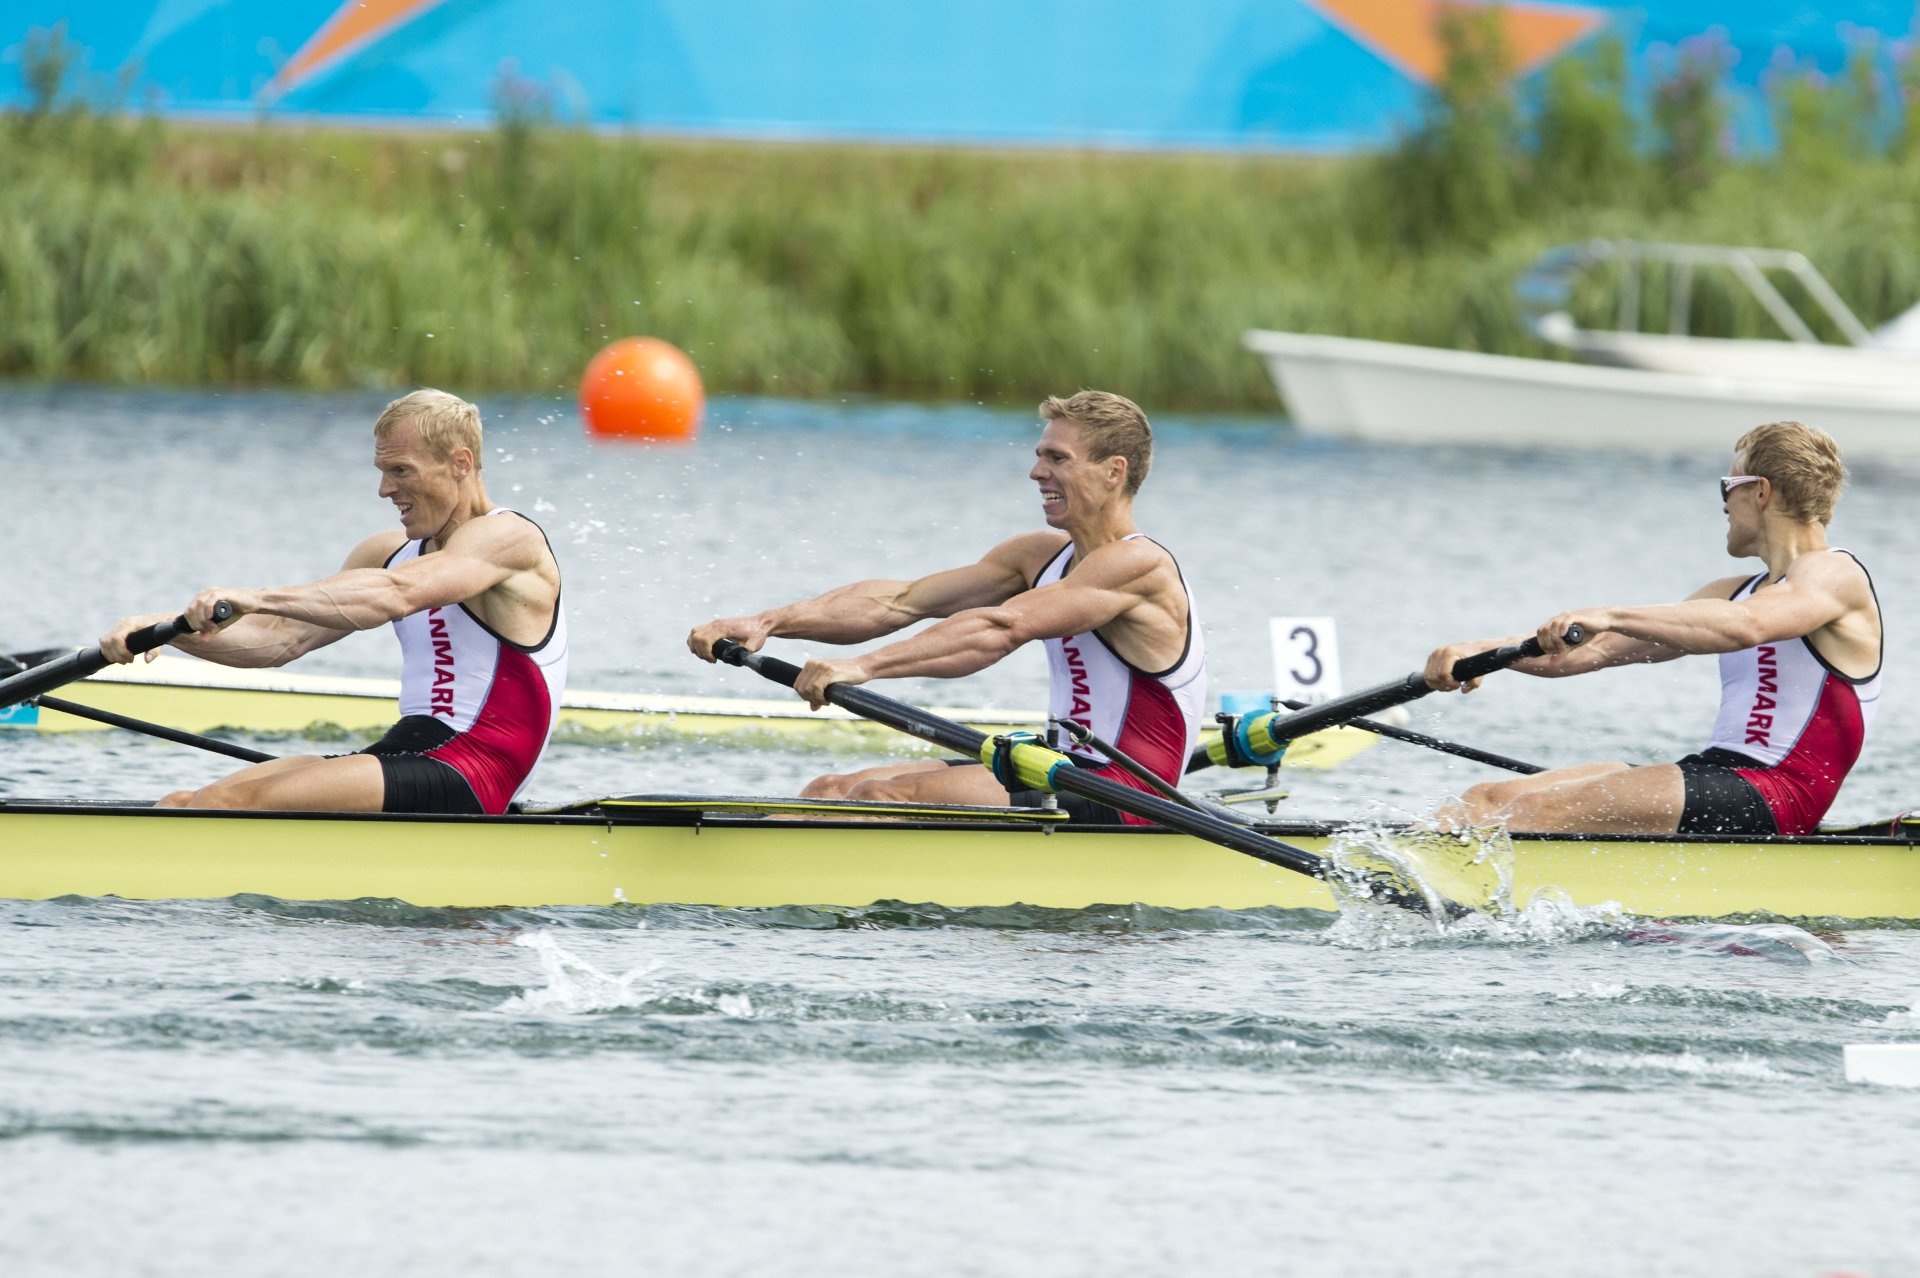 Rowing: Men's sweep pulling team of Denmark competes at the International Regatta. 1920x1280 HD Wallpaper.